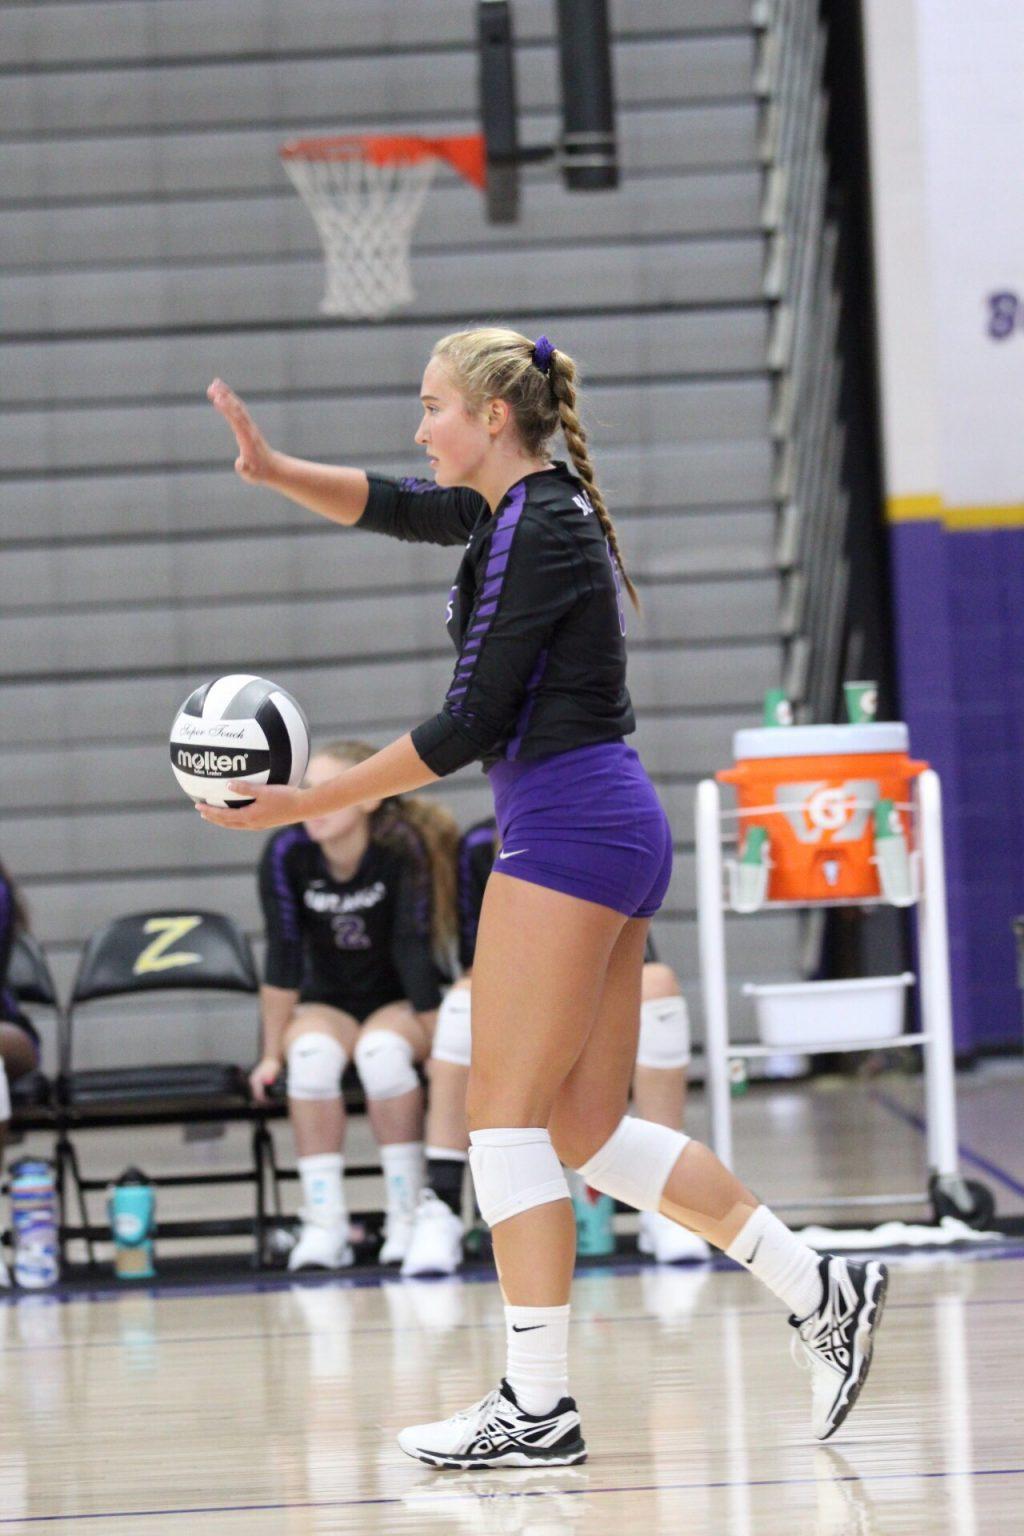 Steele prepares to serve in a game in the fall of 2019. Steele played in the defensive specialist and outside hitter positions during her high school career in Henderson, Nevada. Photo courtesy of Kennedi Steele